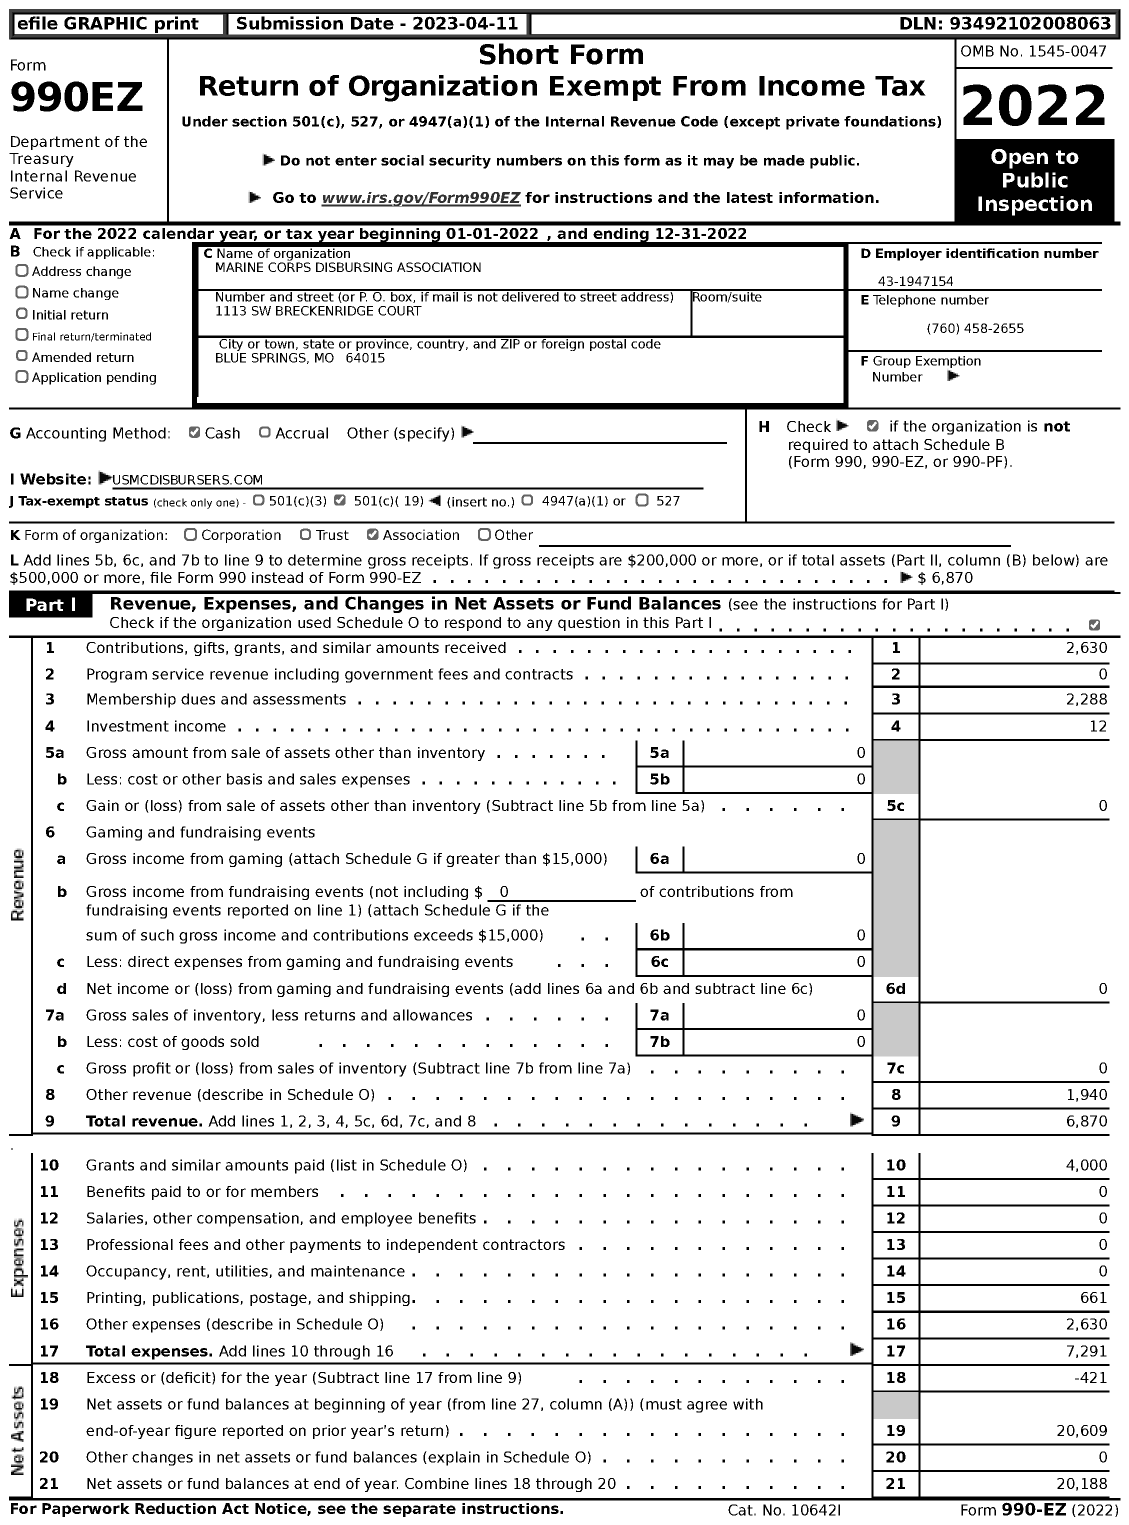 Image of first page of 2022 Form 990EZ for Marine Corps Disbursing Association